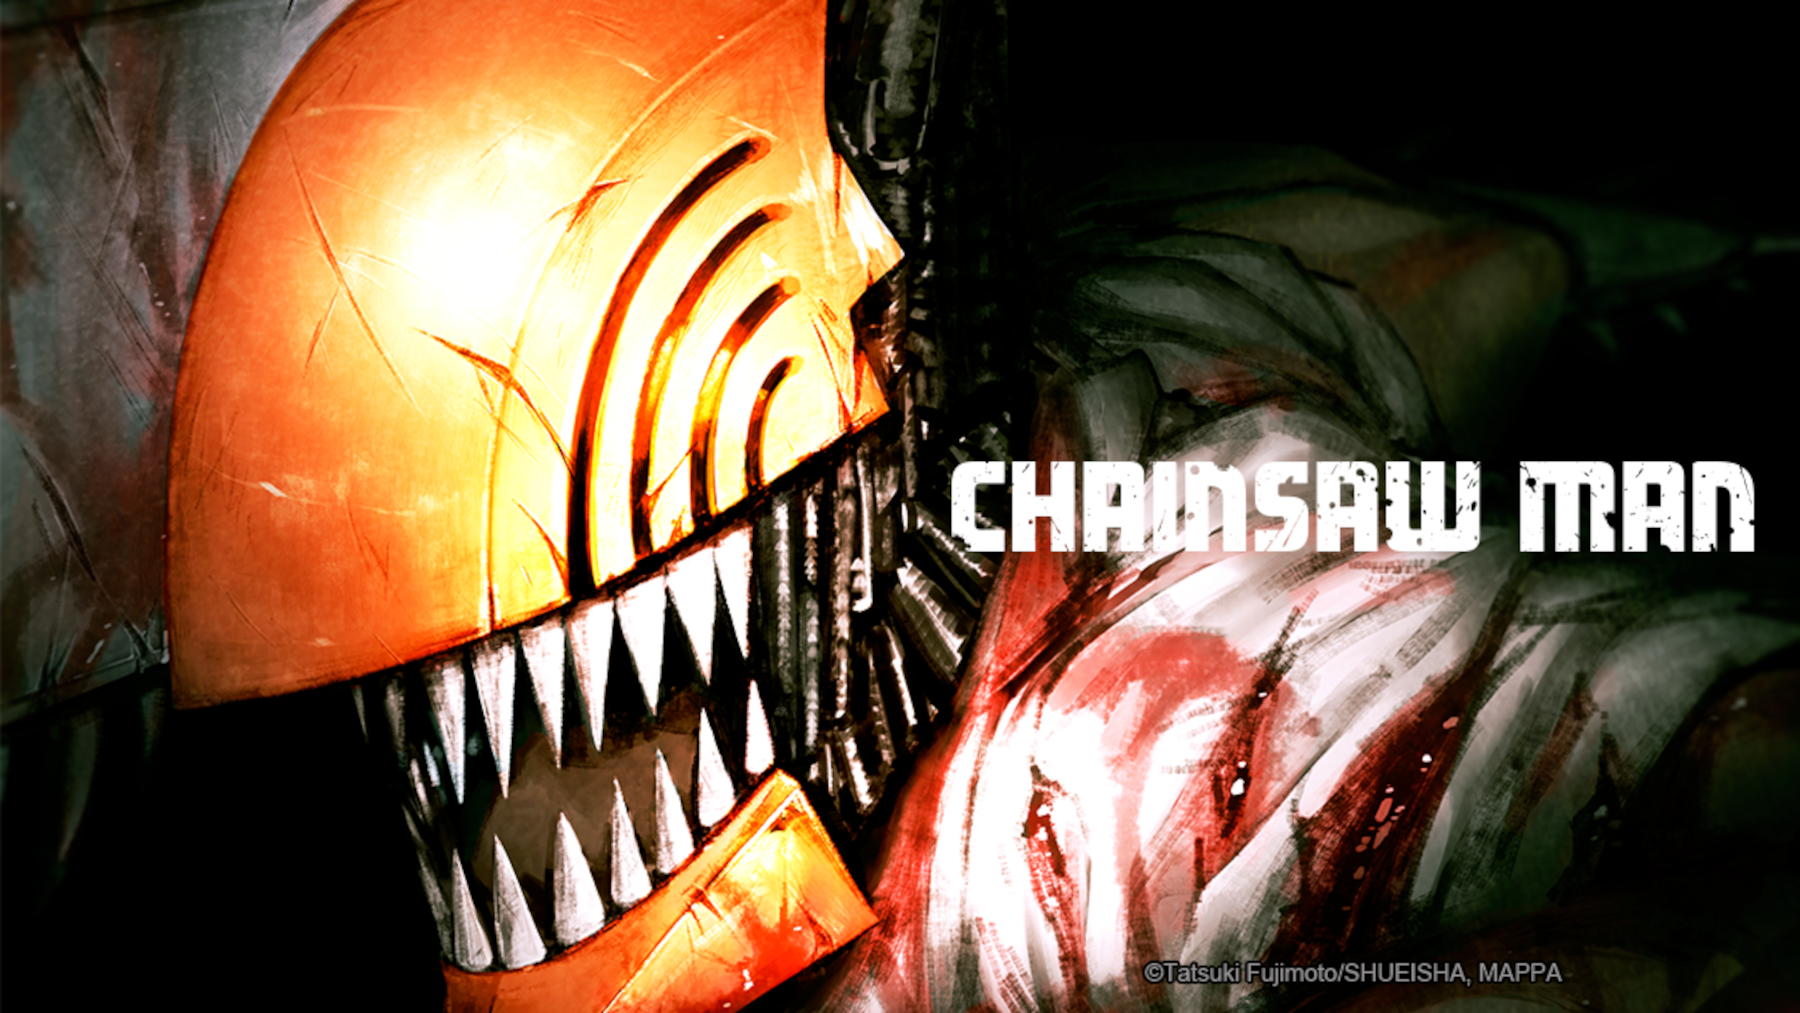 Key art for 'Chainsaw Man,' which recevied a bloody new trailer and October release date window. It shows a yellow chainsaw head with sharp teeth.